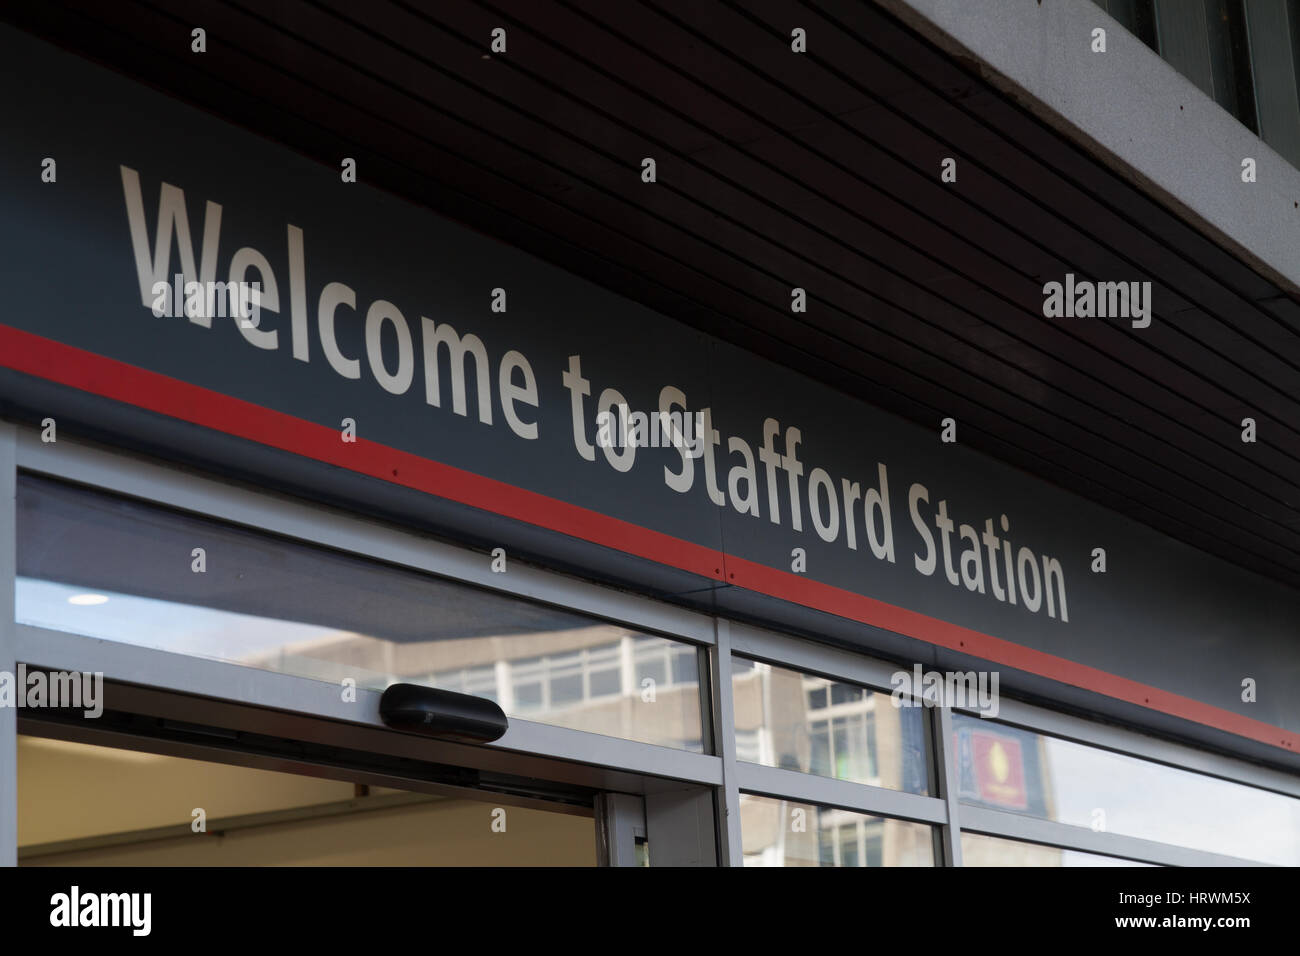 Stafford Station Railway Station Train Station entrance welcome sign Stock Photo